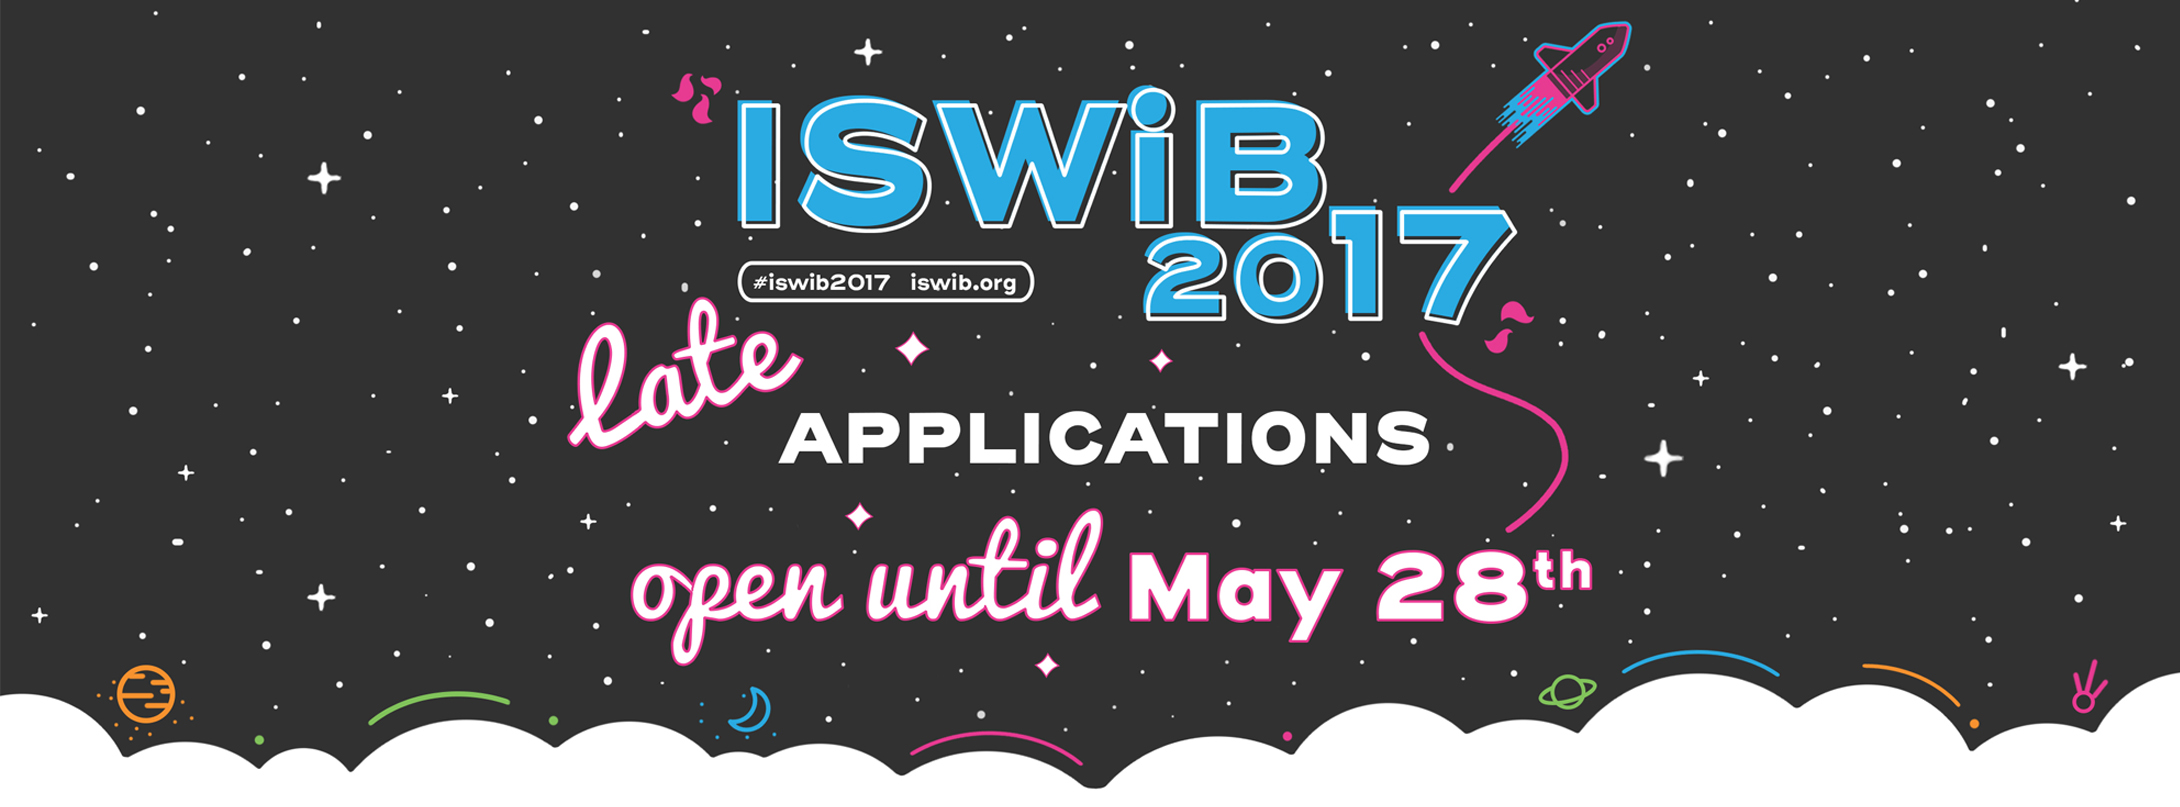 Late Applications ISWiB2017